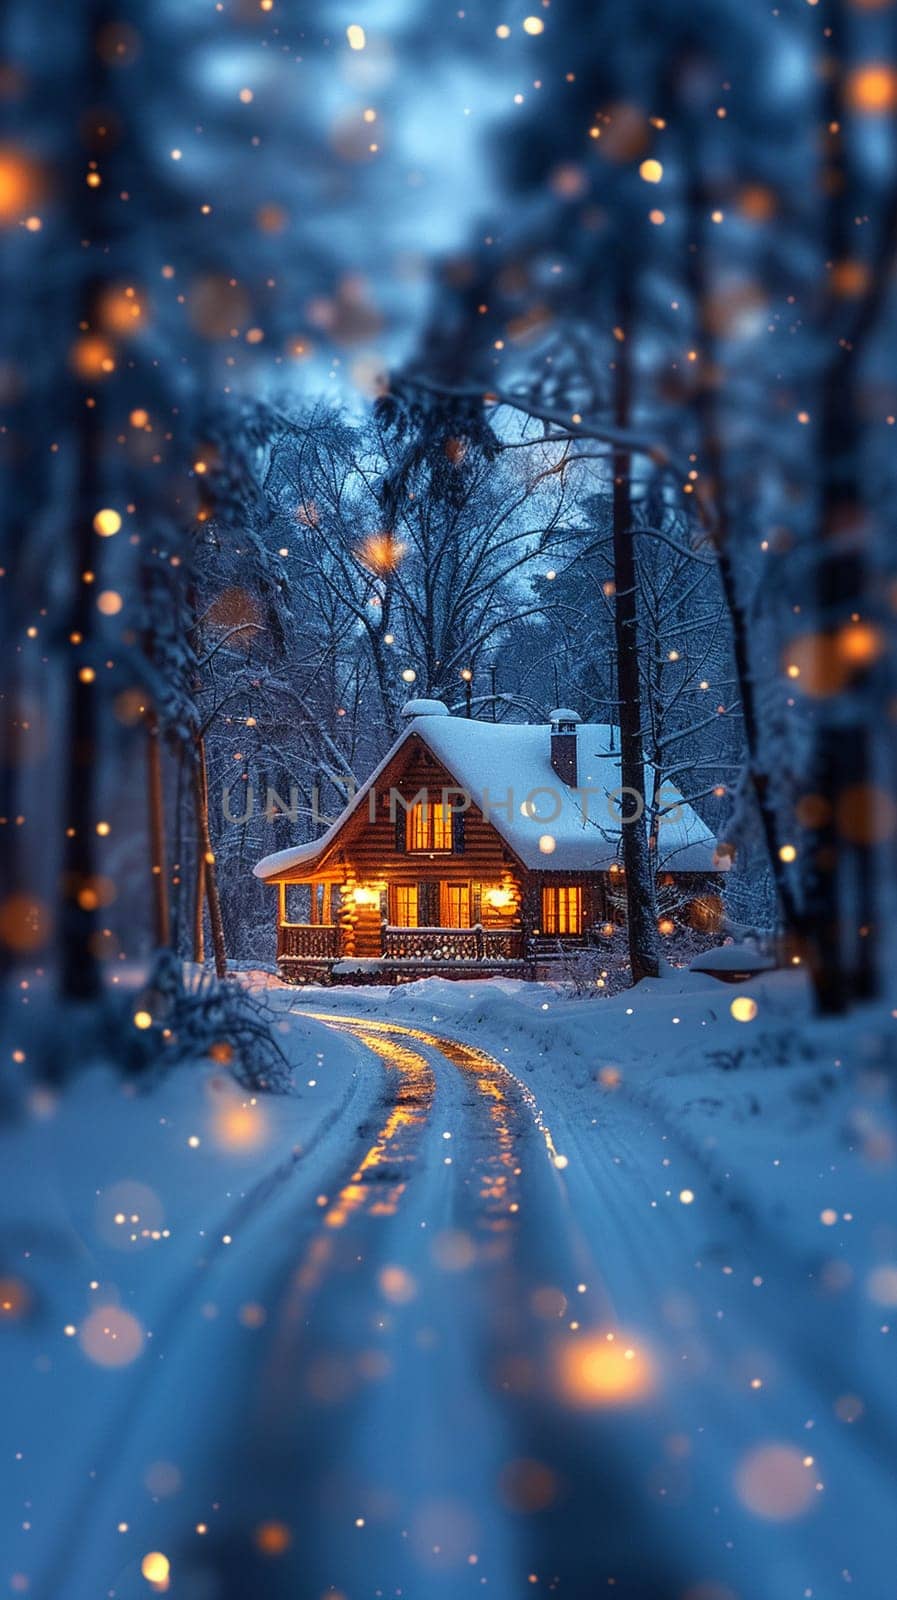 Cozy Winter Cabin with Blurred Snowflakes and Warm Lights by Benzoix